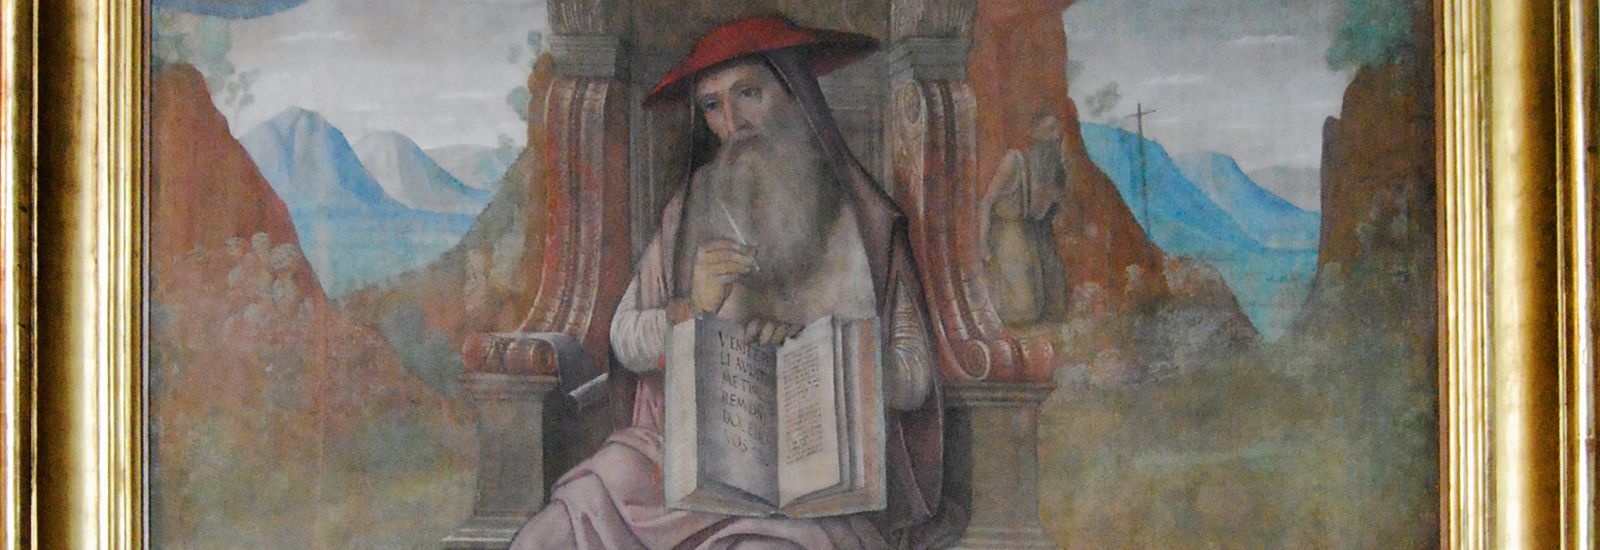 A close up of a painting of St Jerome